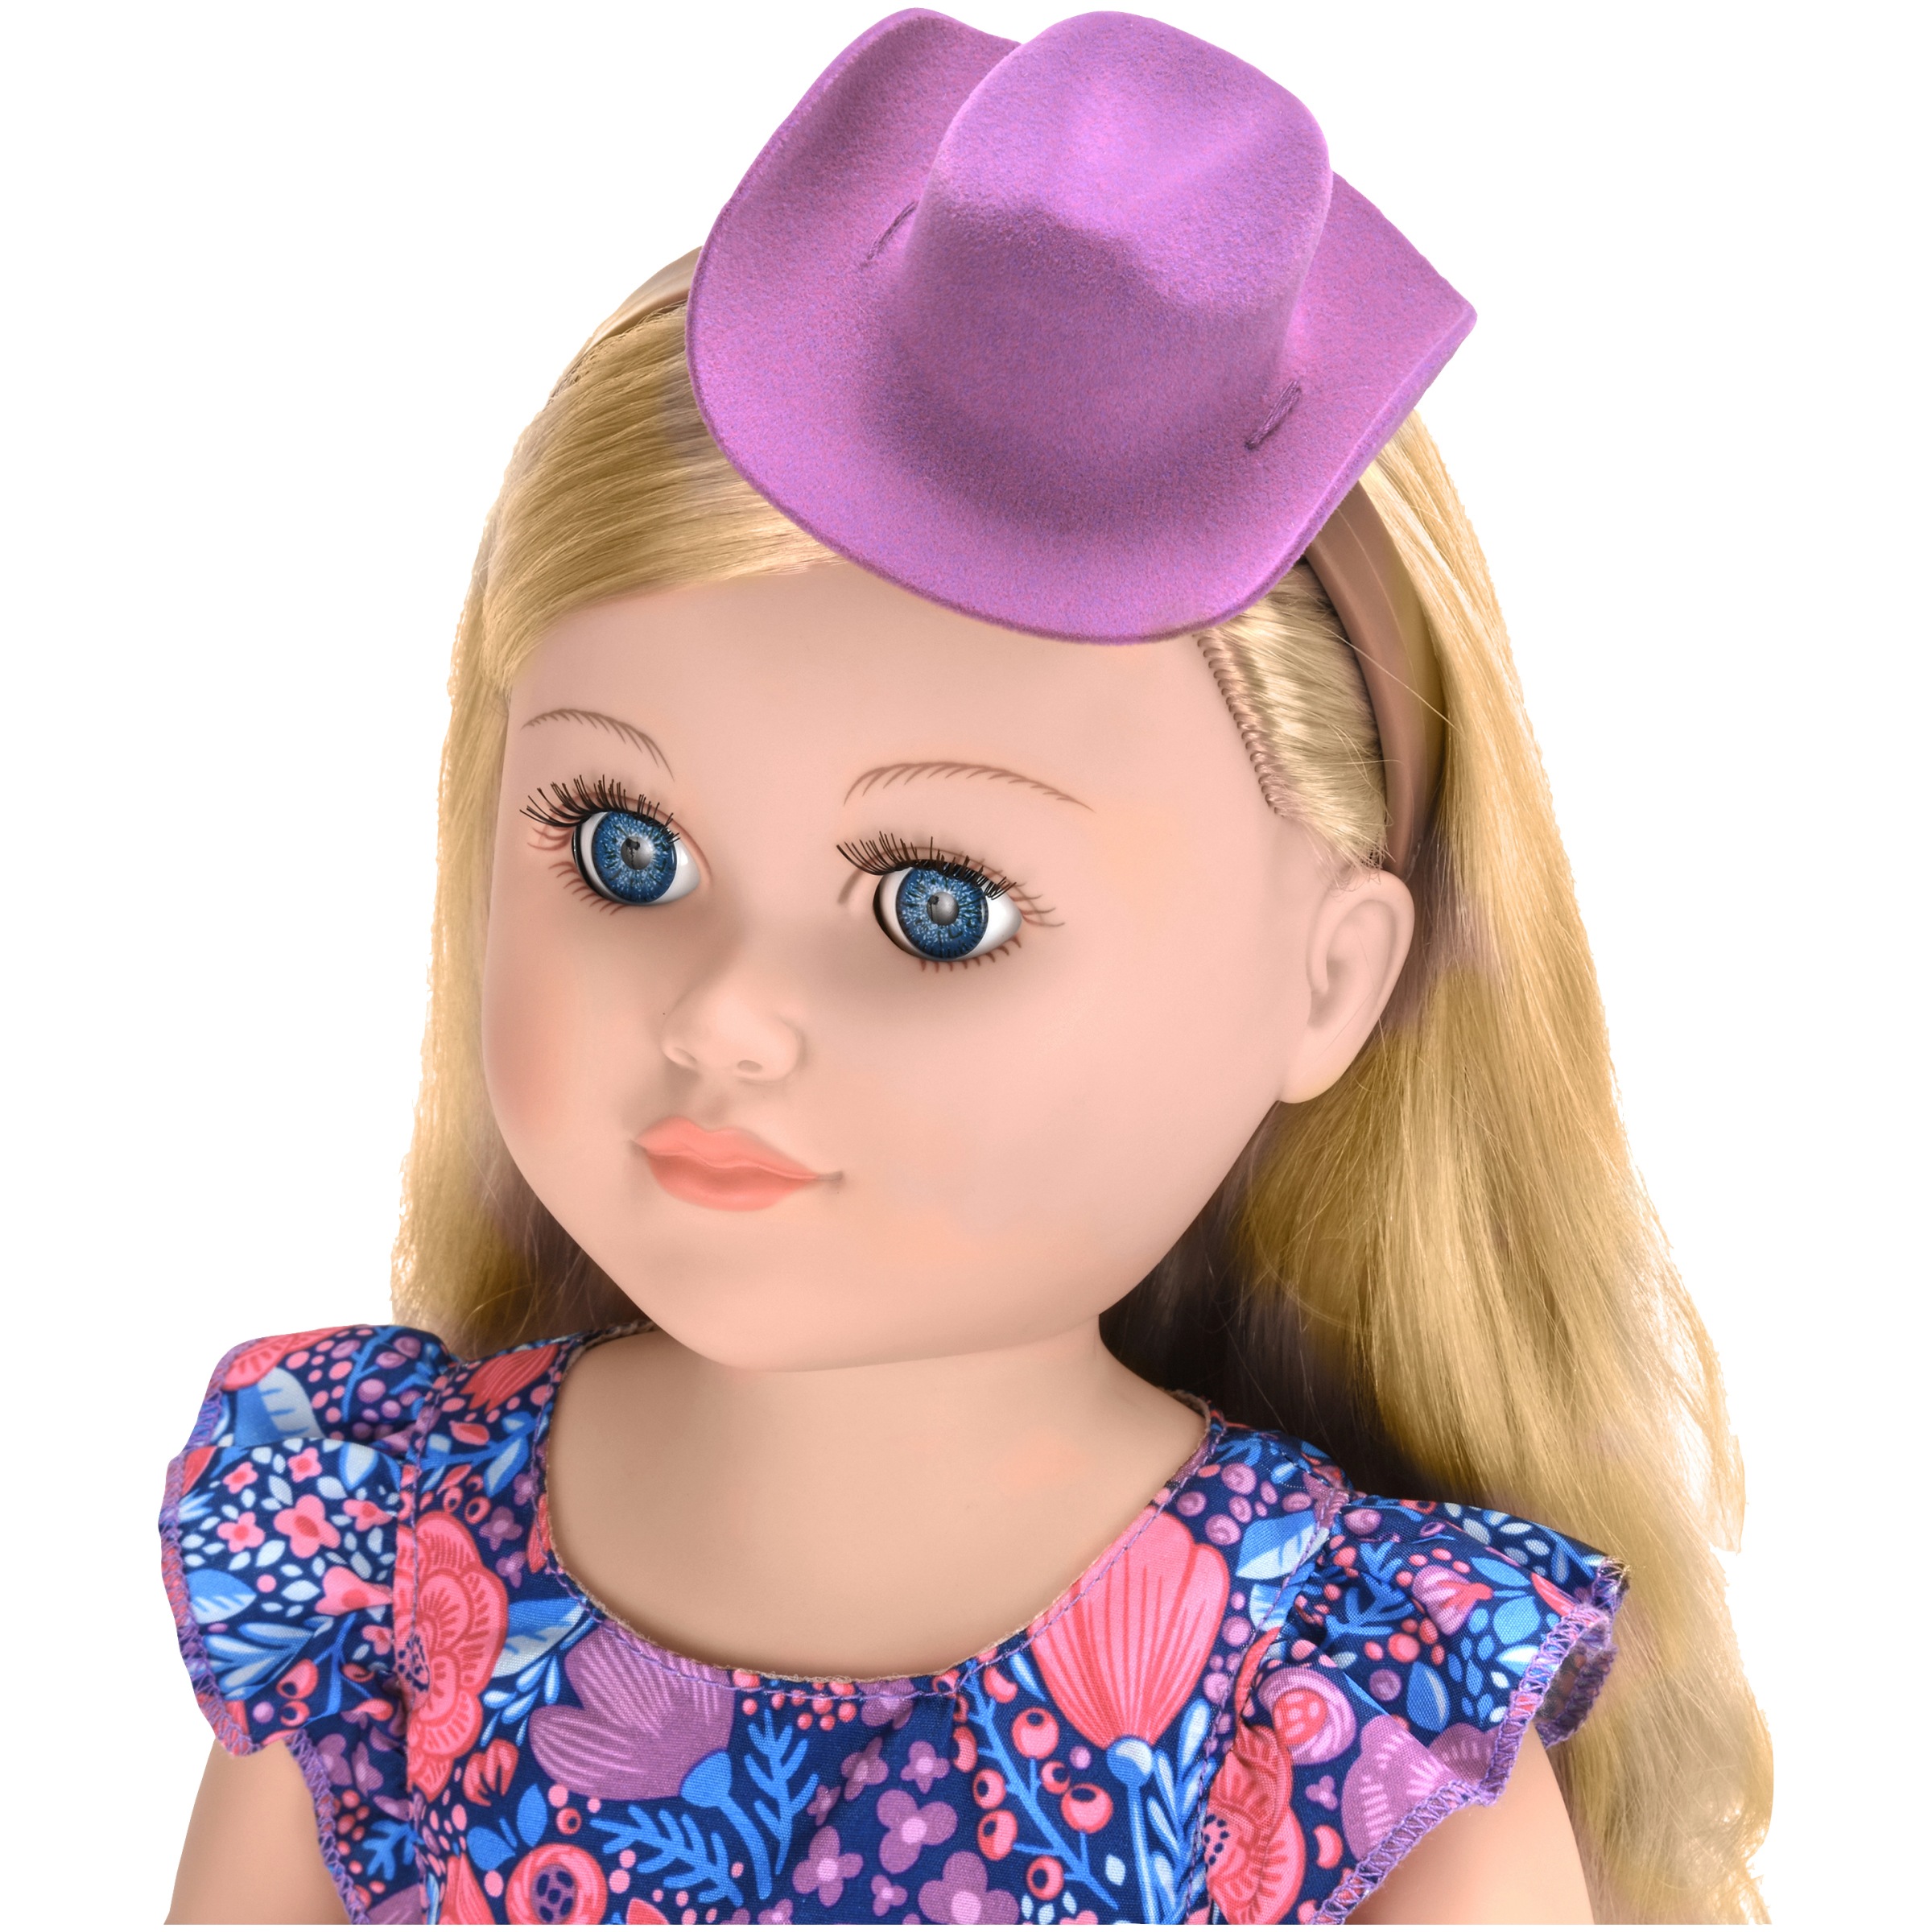 My Life As 18 Poseable Cowgirl Doll Blonde Hair Soft Torso 